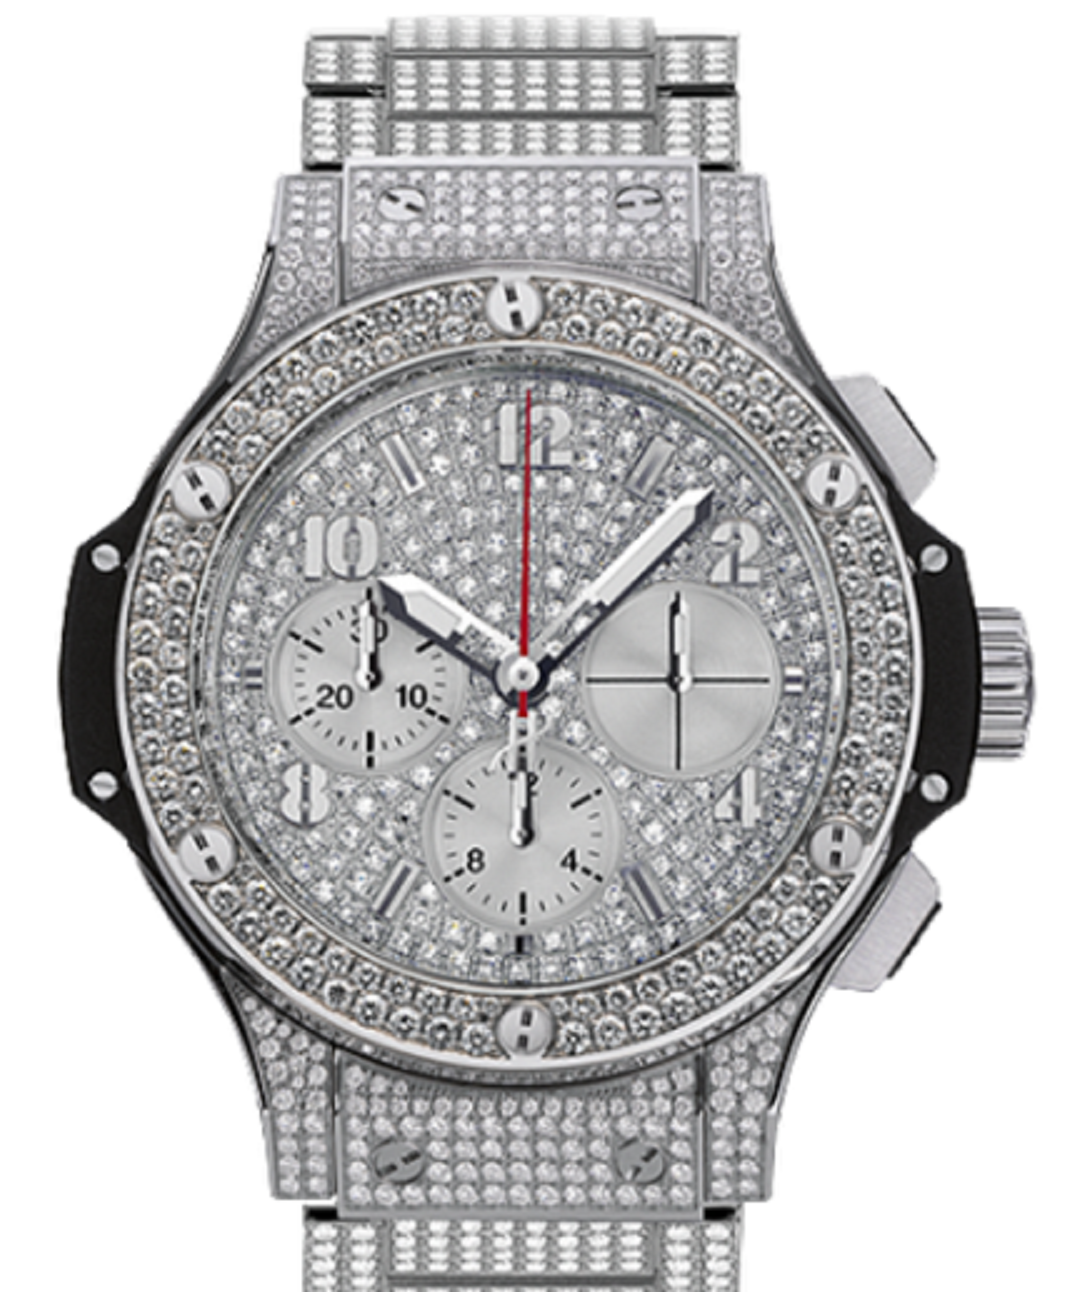 Big Bang 41mm in Steel with Full Pave Diamond Bezel on Steel Diamond Bracelet with Full Paved Diamond Dial